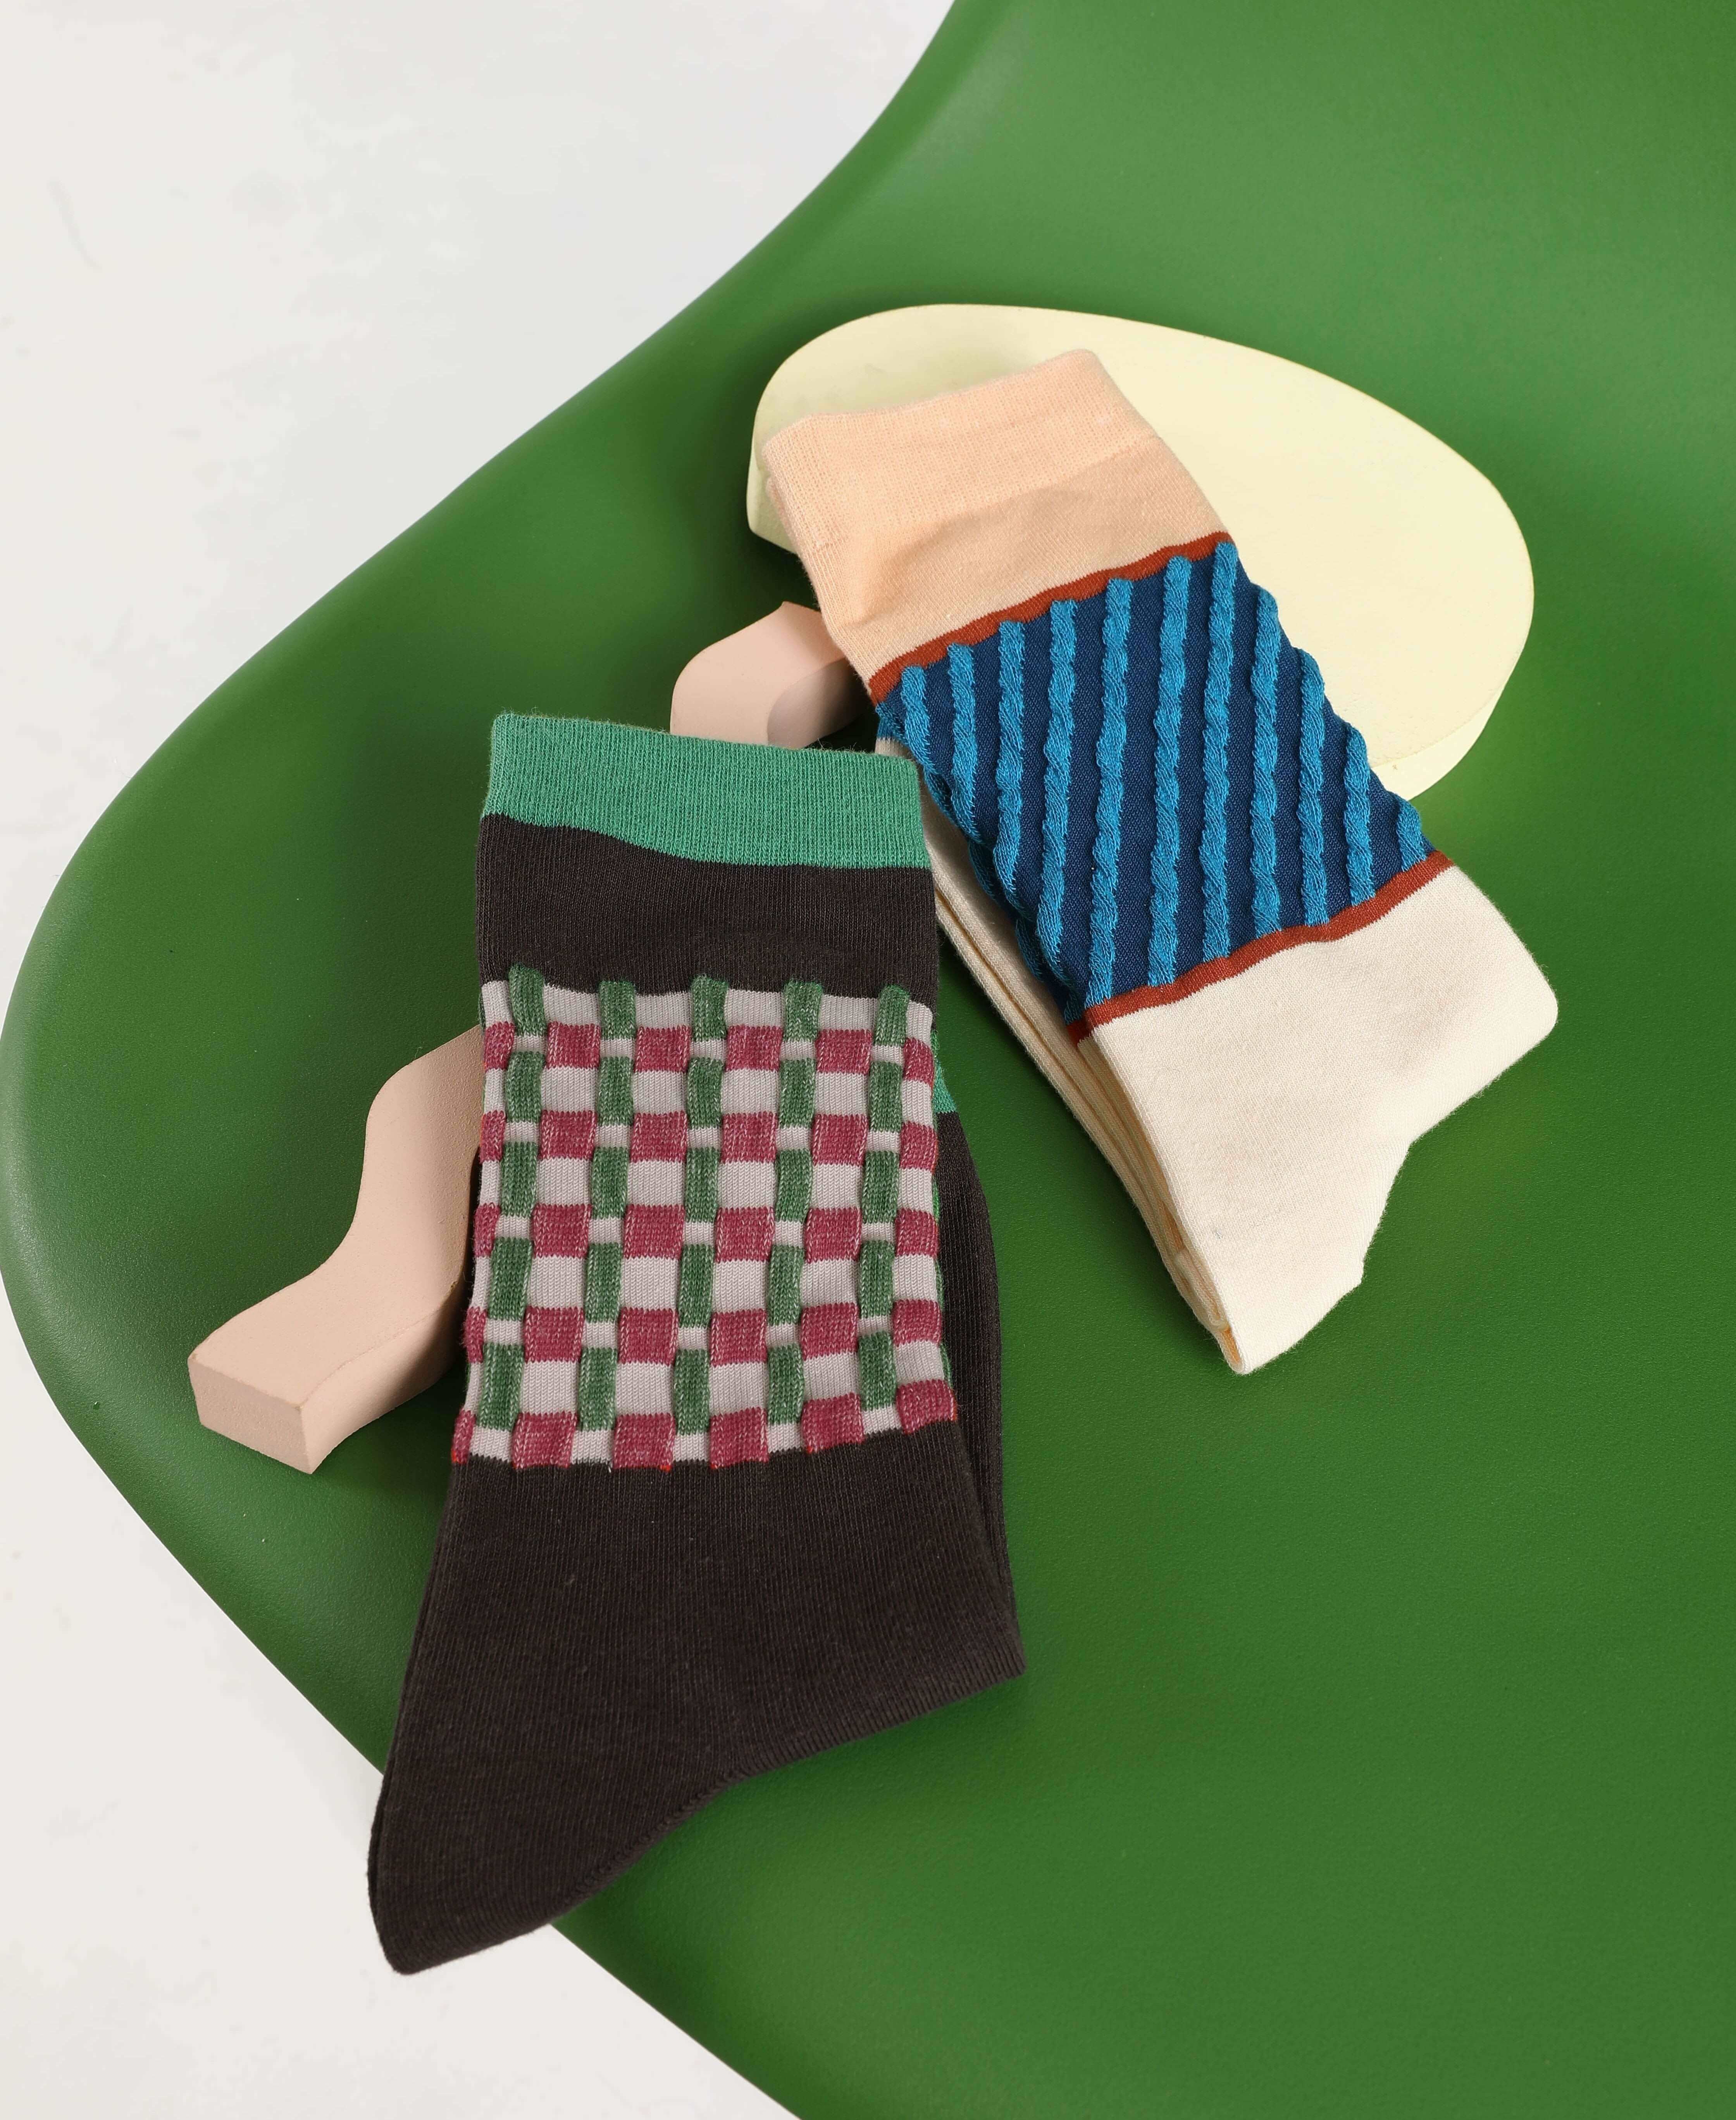 A display of Korean style winter socks, perfect for New Year's celebrations, presented on a green chair